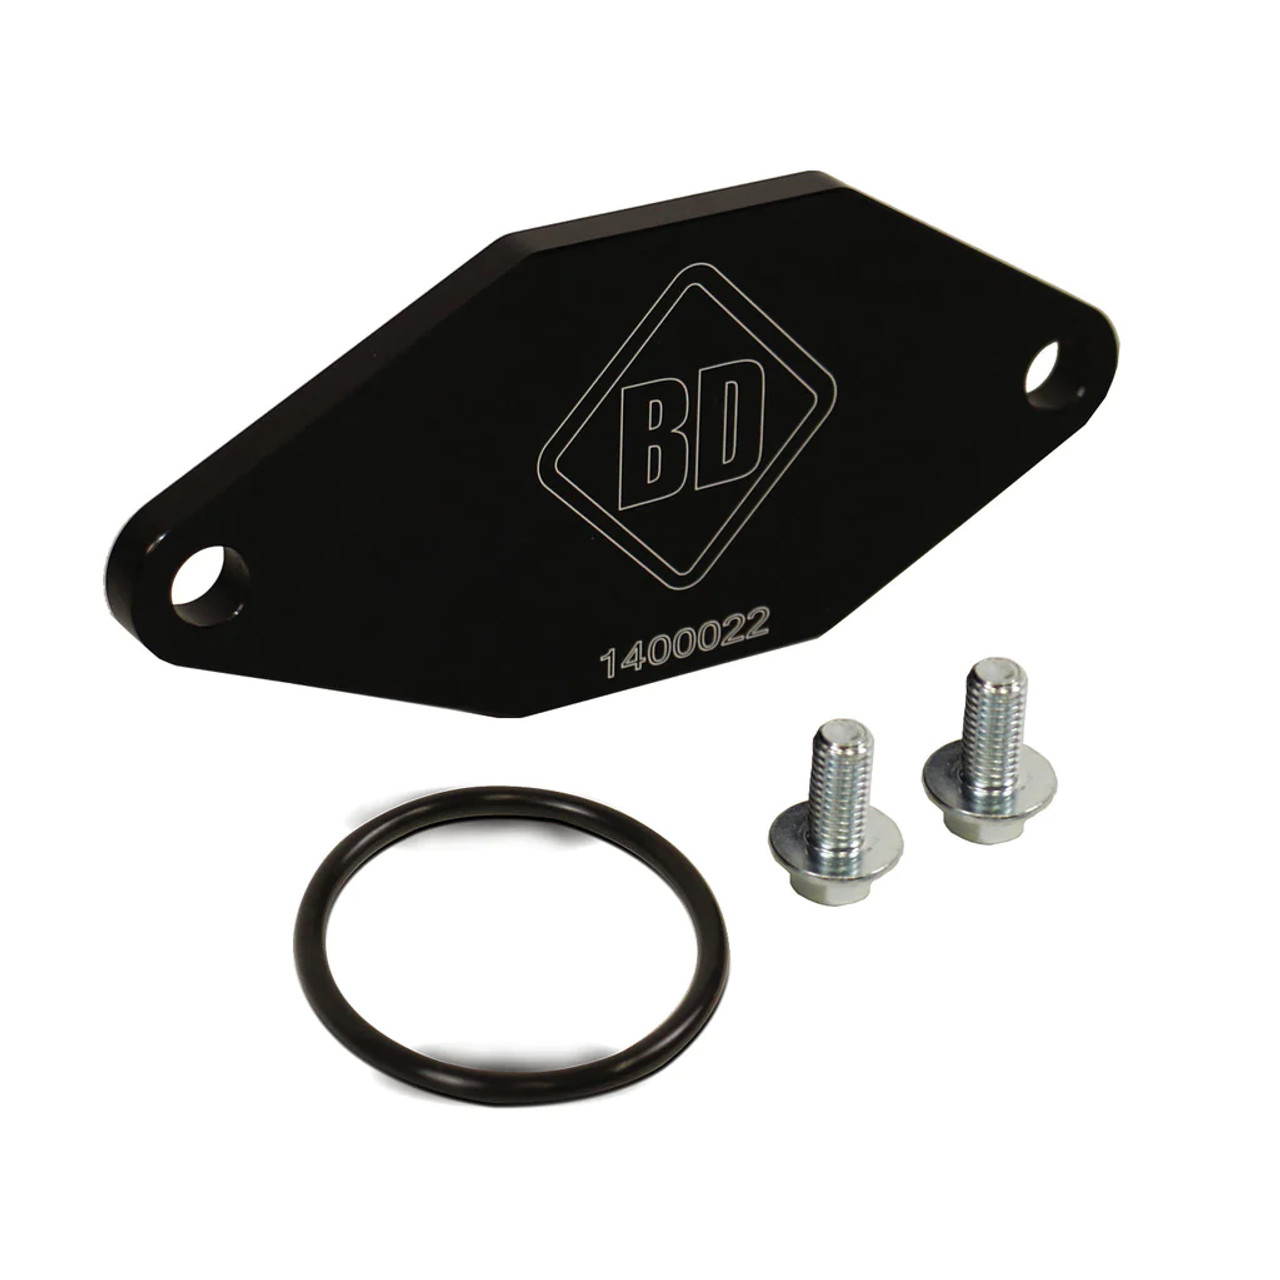 BD KILLER FROST PLUG PLATE for 1989 to 2002 Dodge 5.9L Cummins (1040022) Main View